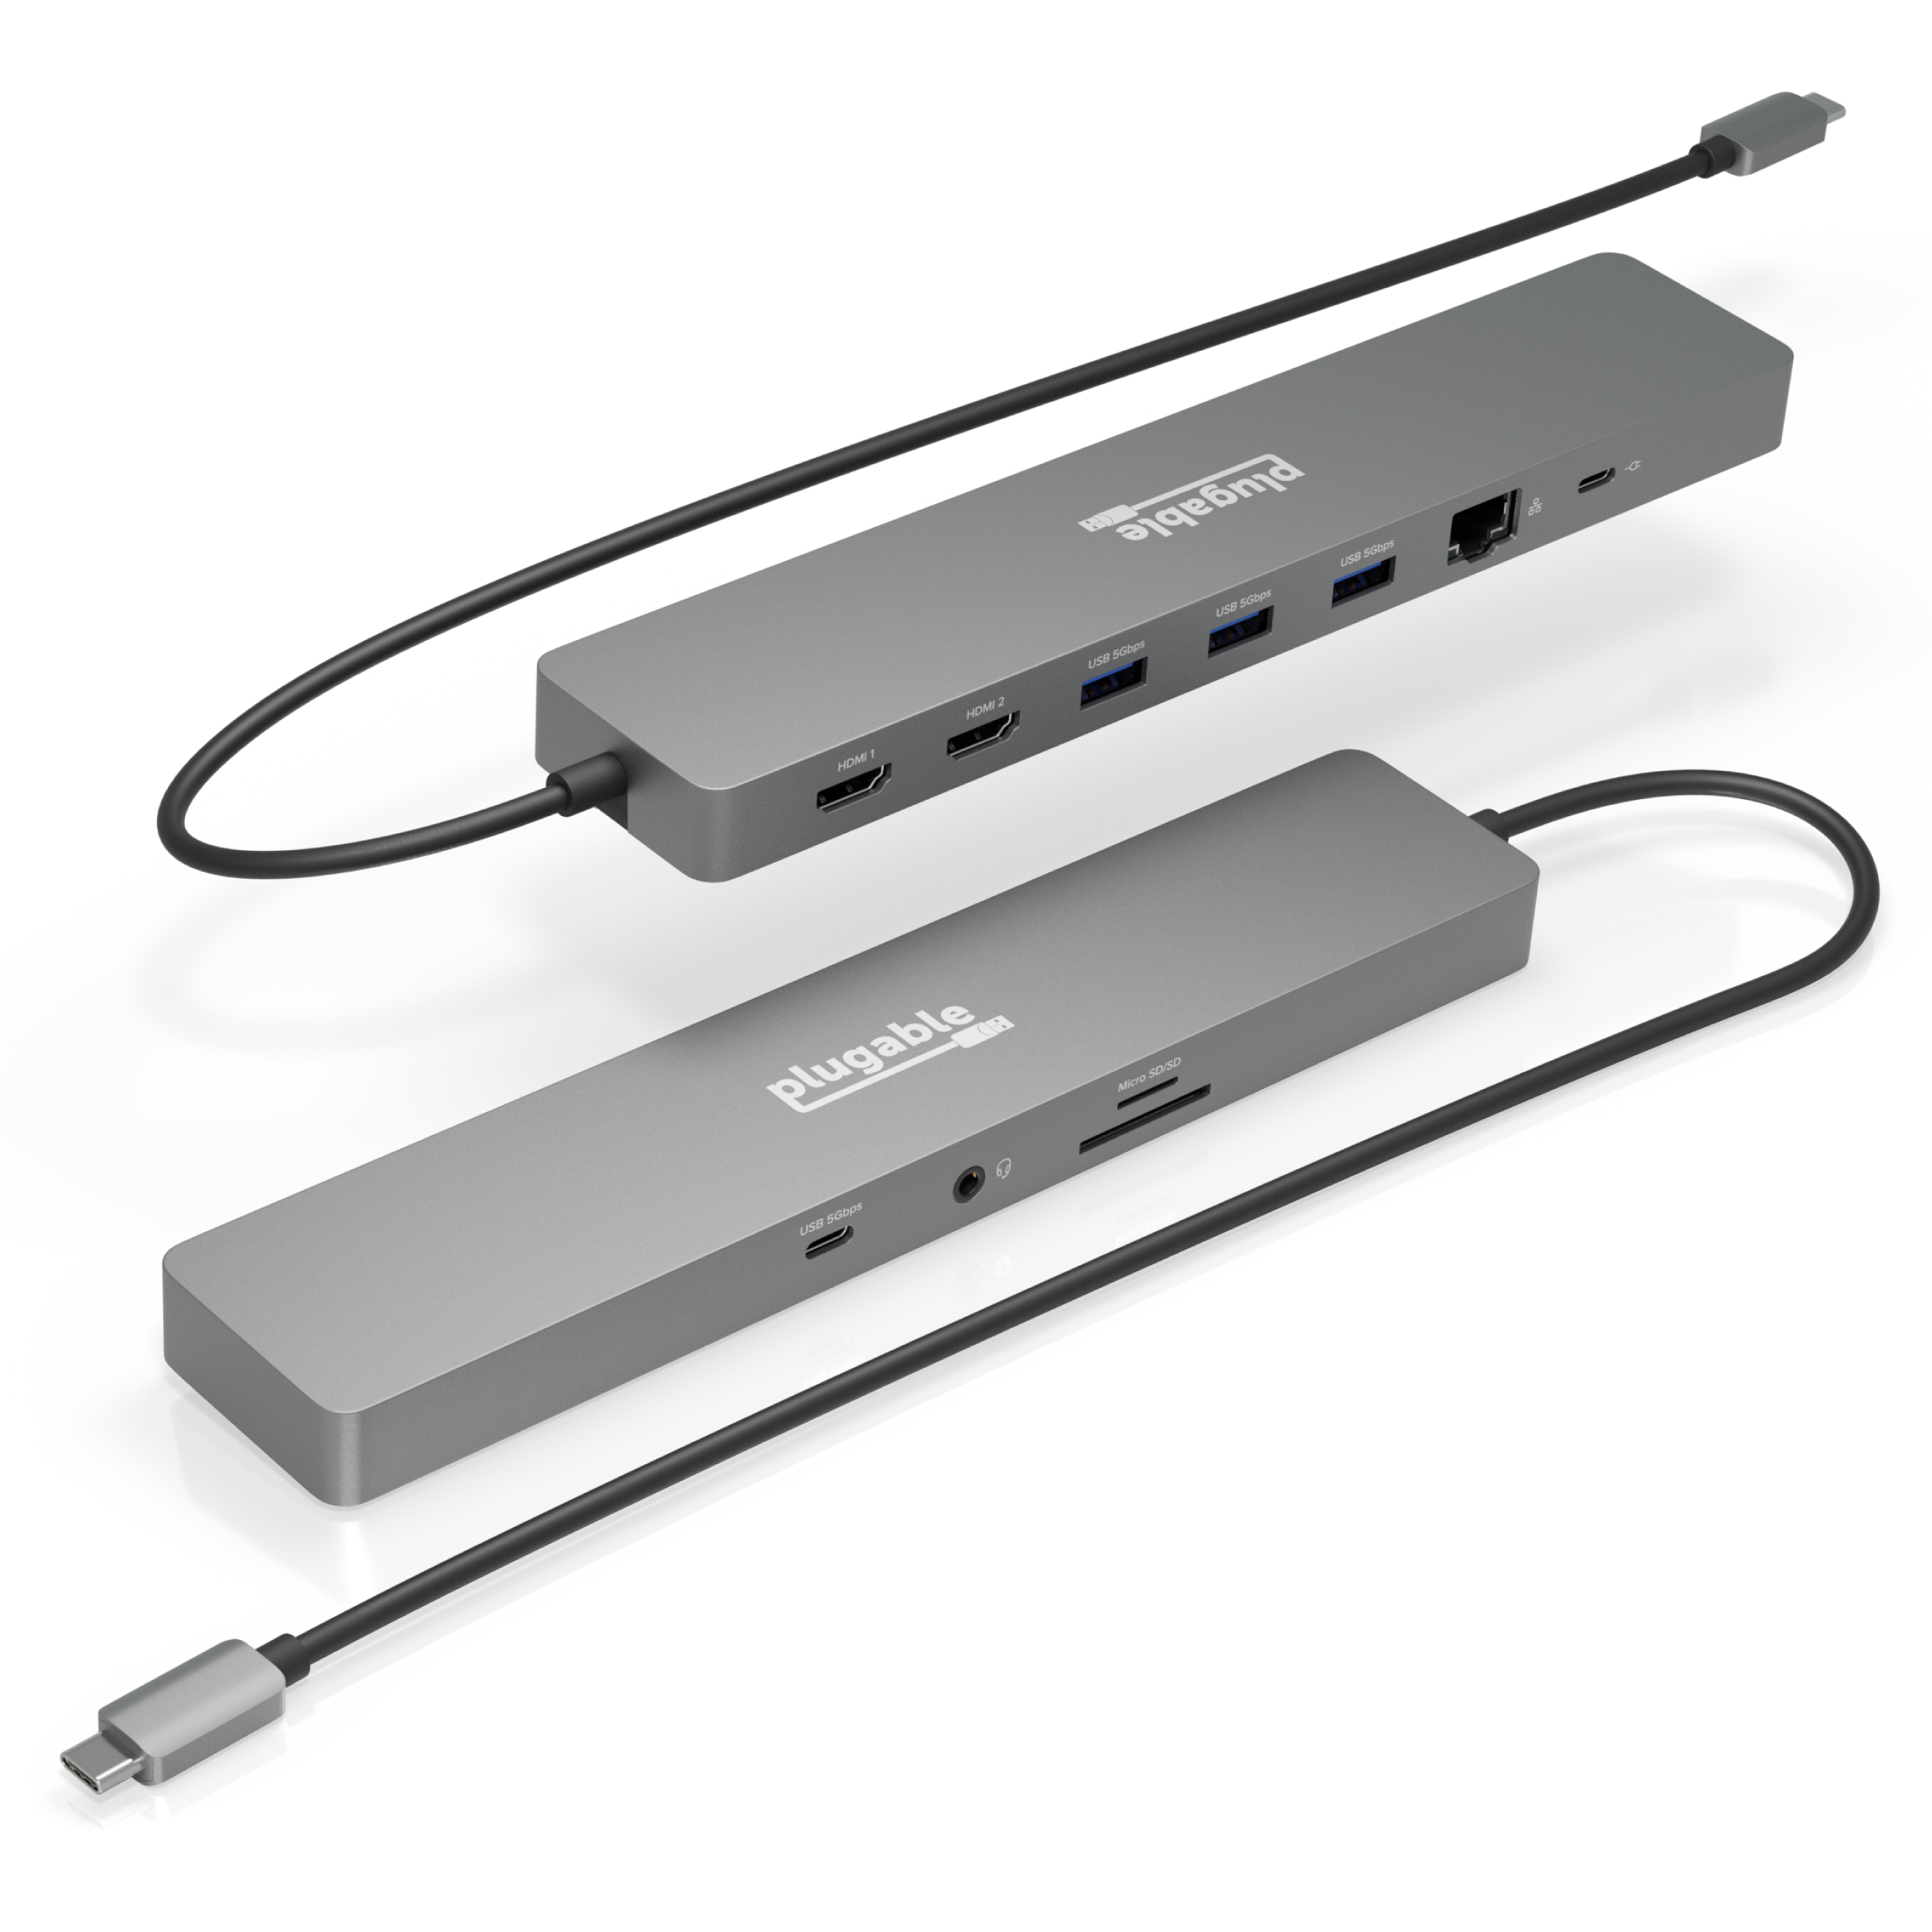 Plugable 11-in-1 USB-C Docking Station, 100W Pass-through Charging, Dual Monitor with 4K 60Hz HDMI, Compatible with Thunderbolt, USB-C Windows, Chromebooks, Displays Mirrored on Mac - image 1 of 7